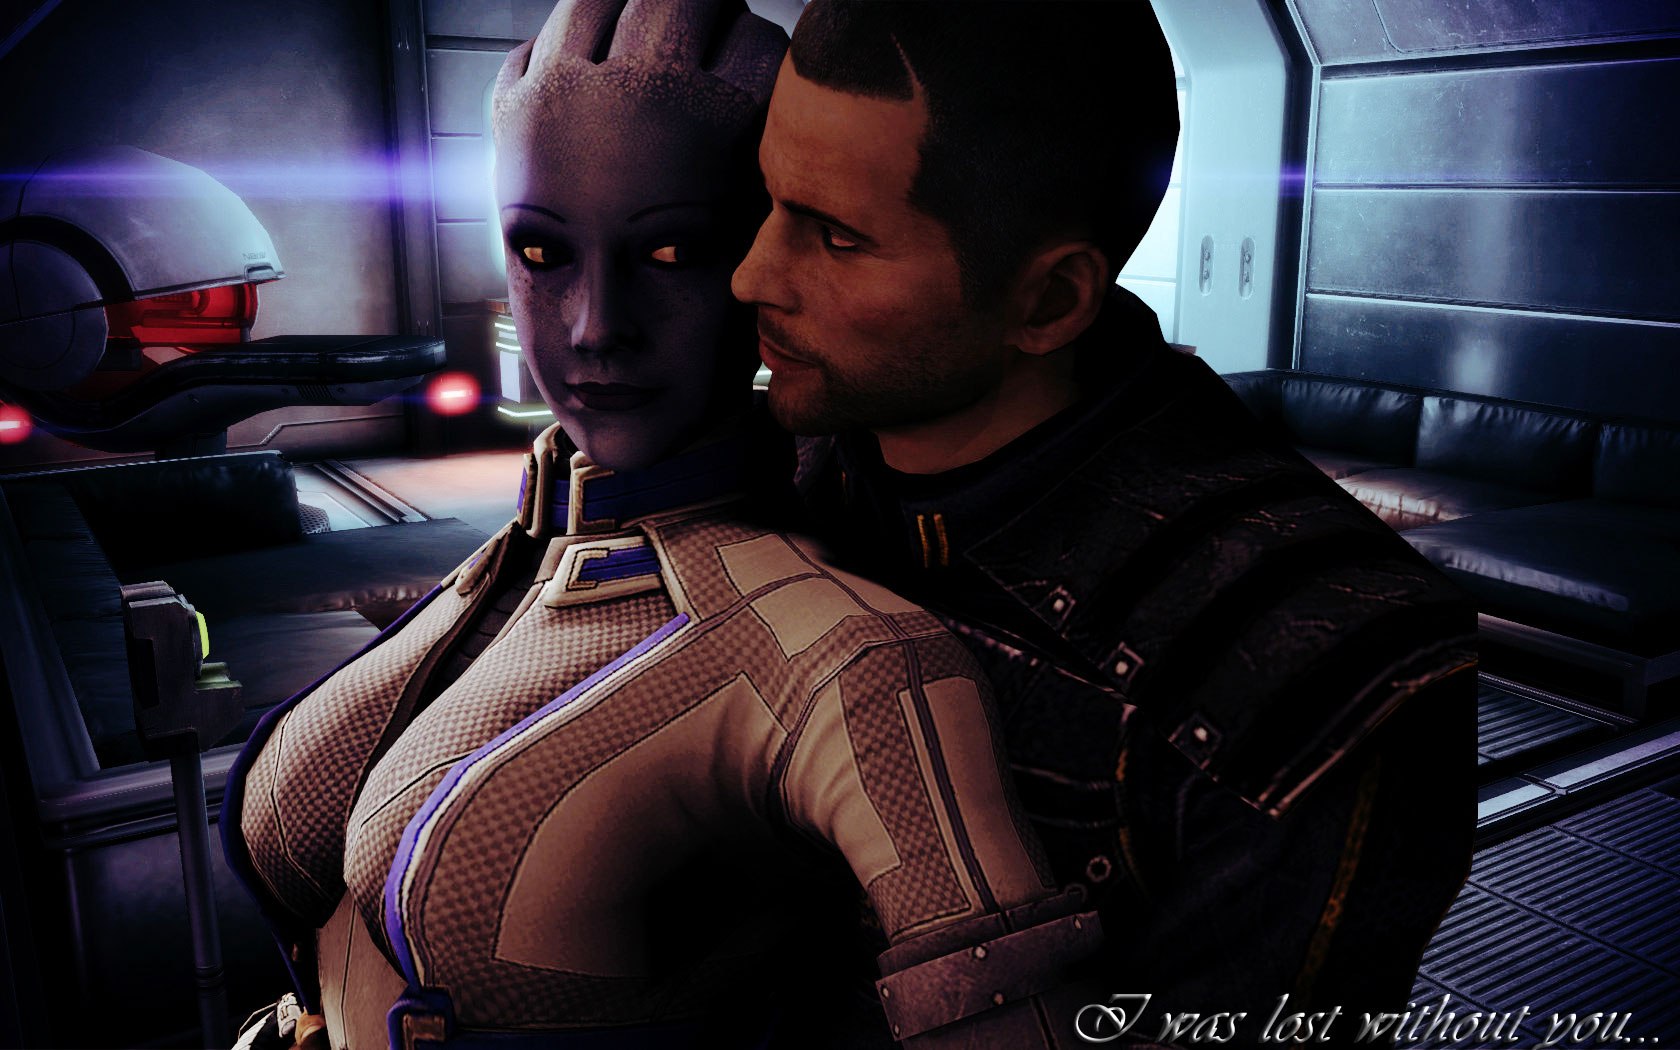 Mass effect all hentai sex pics naked photo